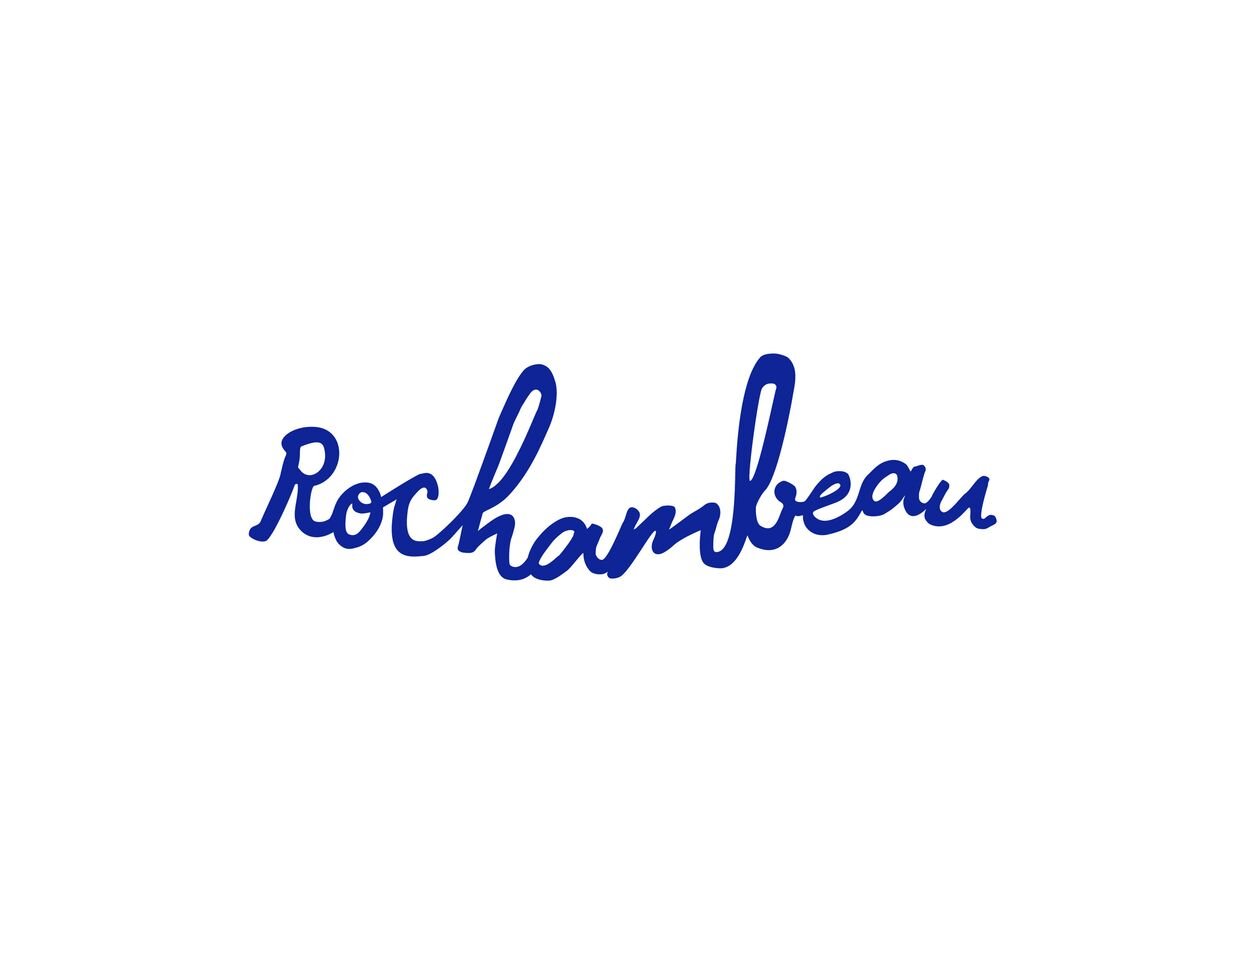 Let’s French. #rochambeaubos